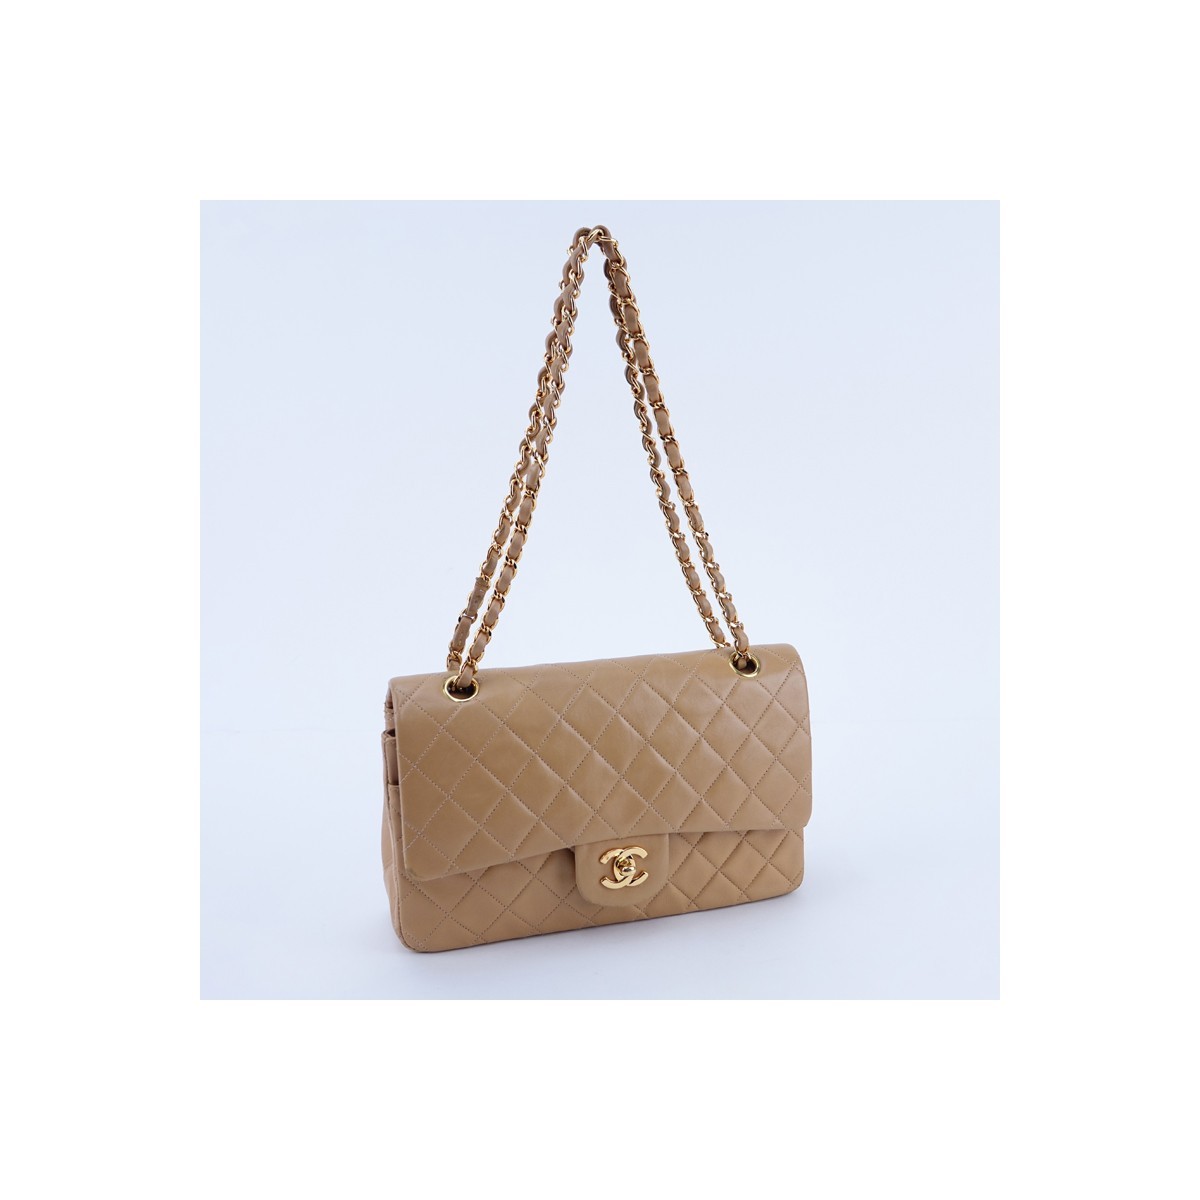 Chanel Dark Beige Quilted Leather Classic Double Flap 26 Handbag. Gold tone hardware, matching leather interior with patch and zippered pockets.